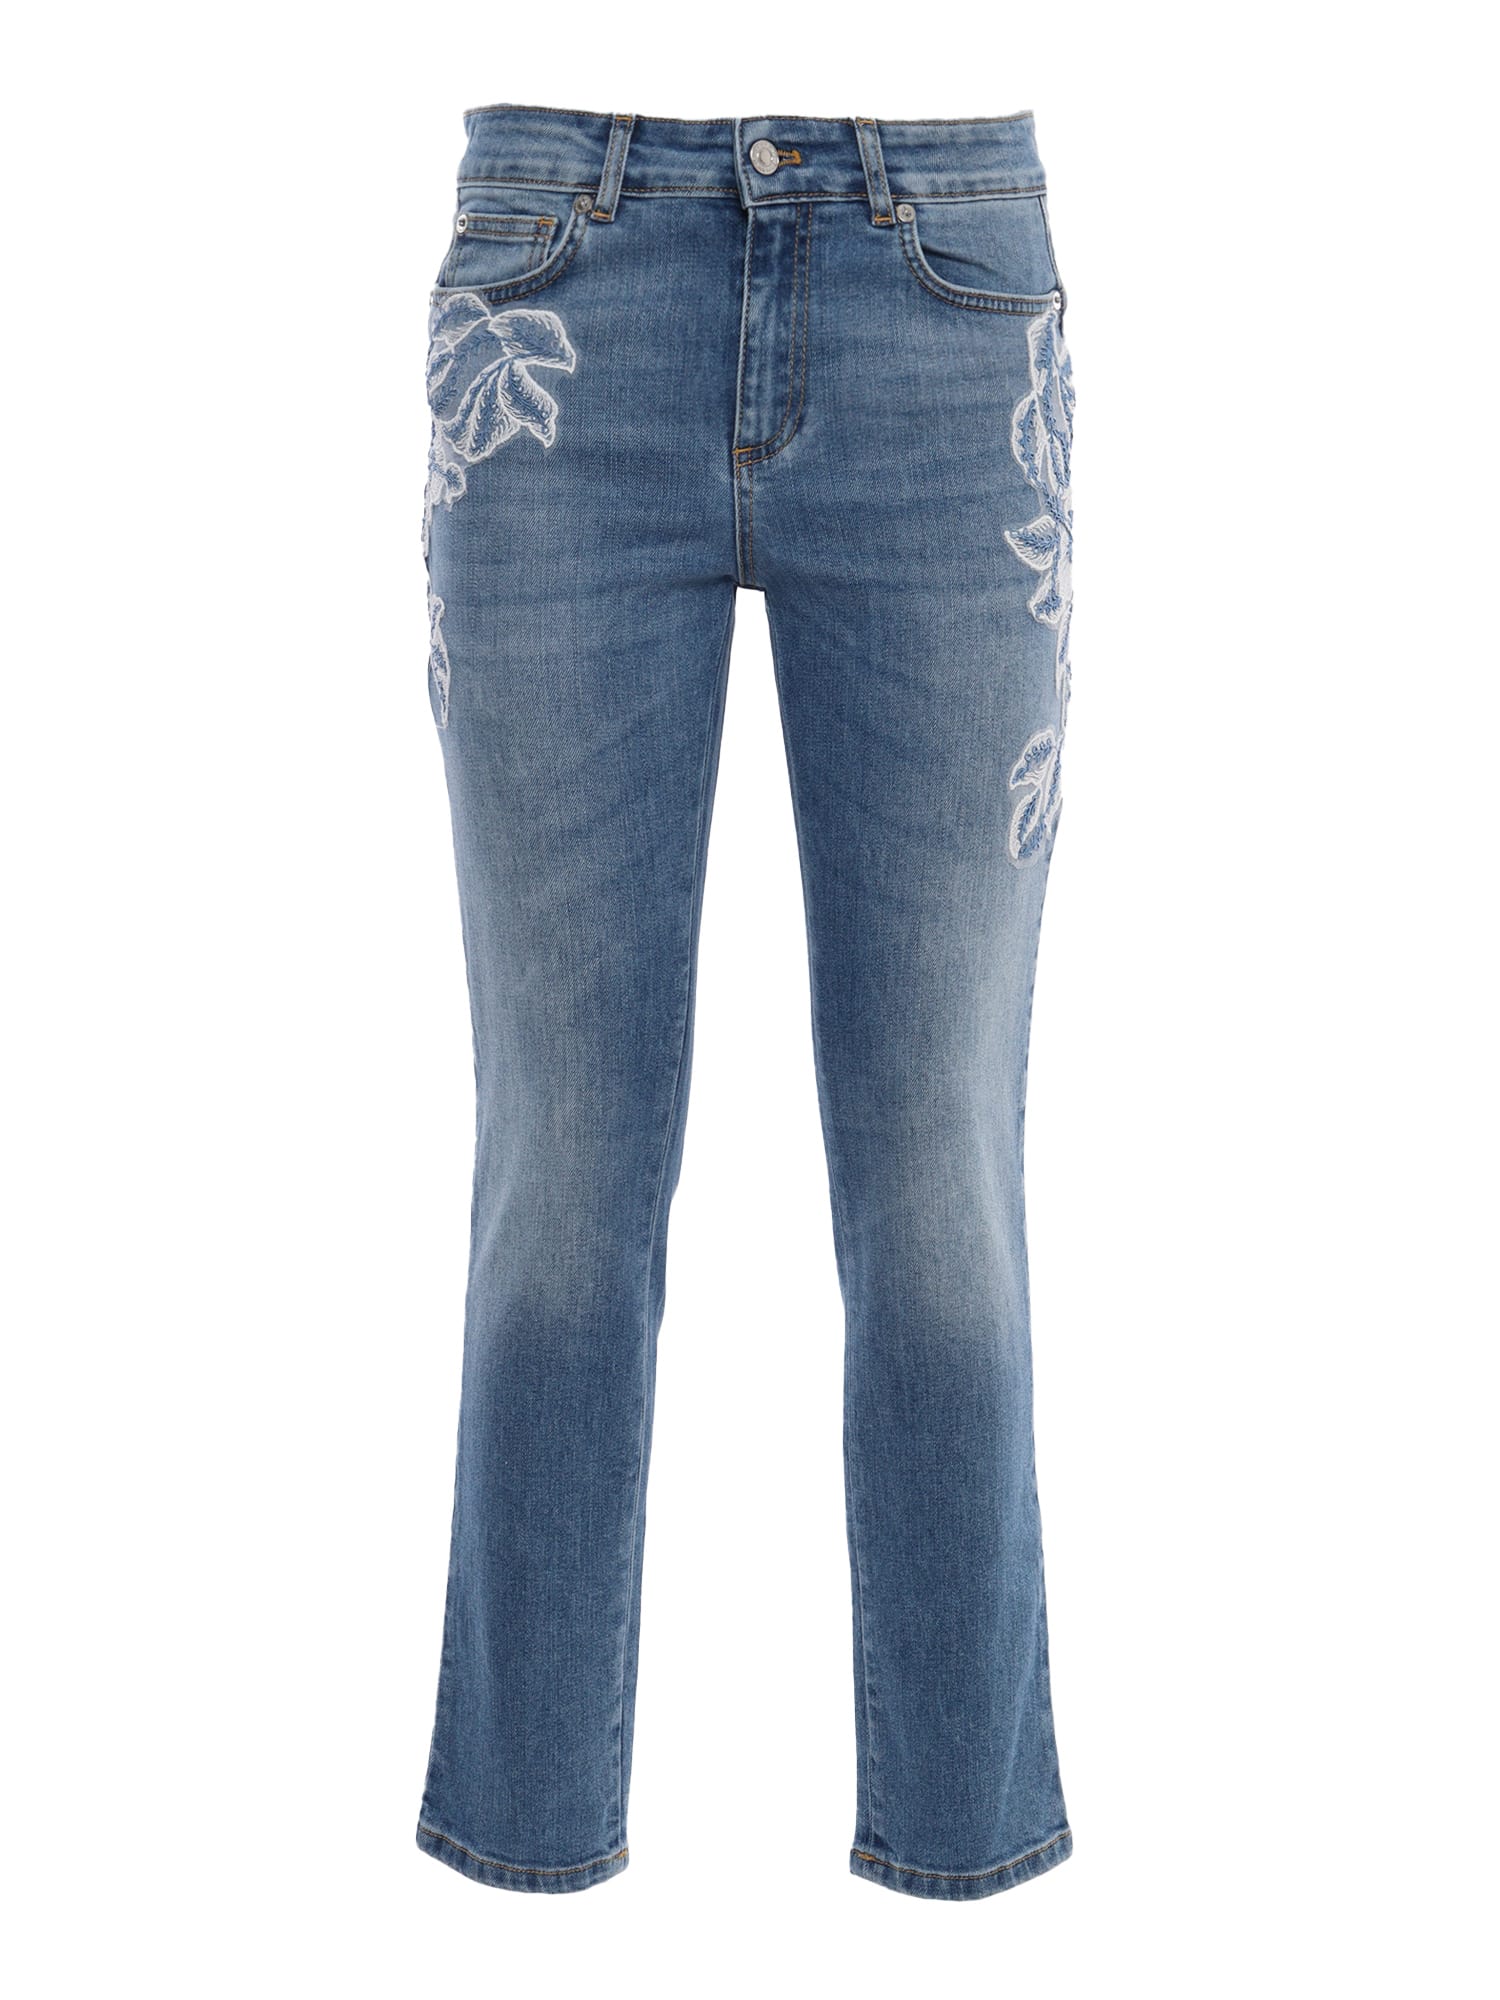 Ermanno Ermanno Scervino Jeans With Lace In Blue